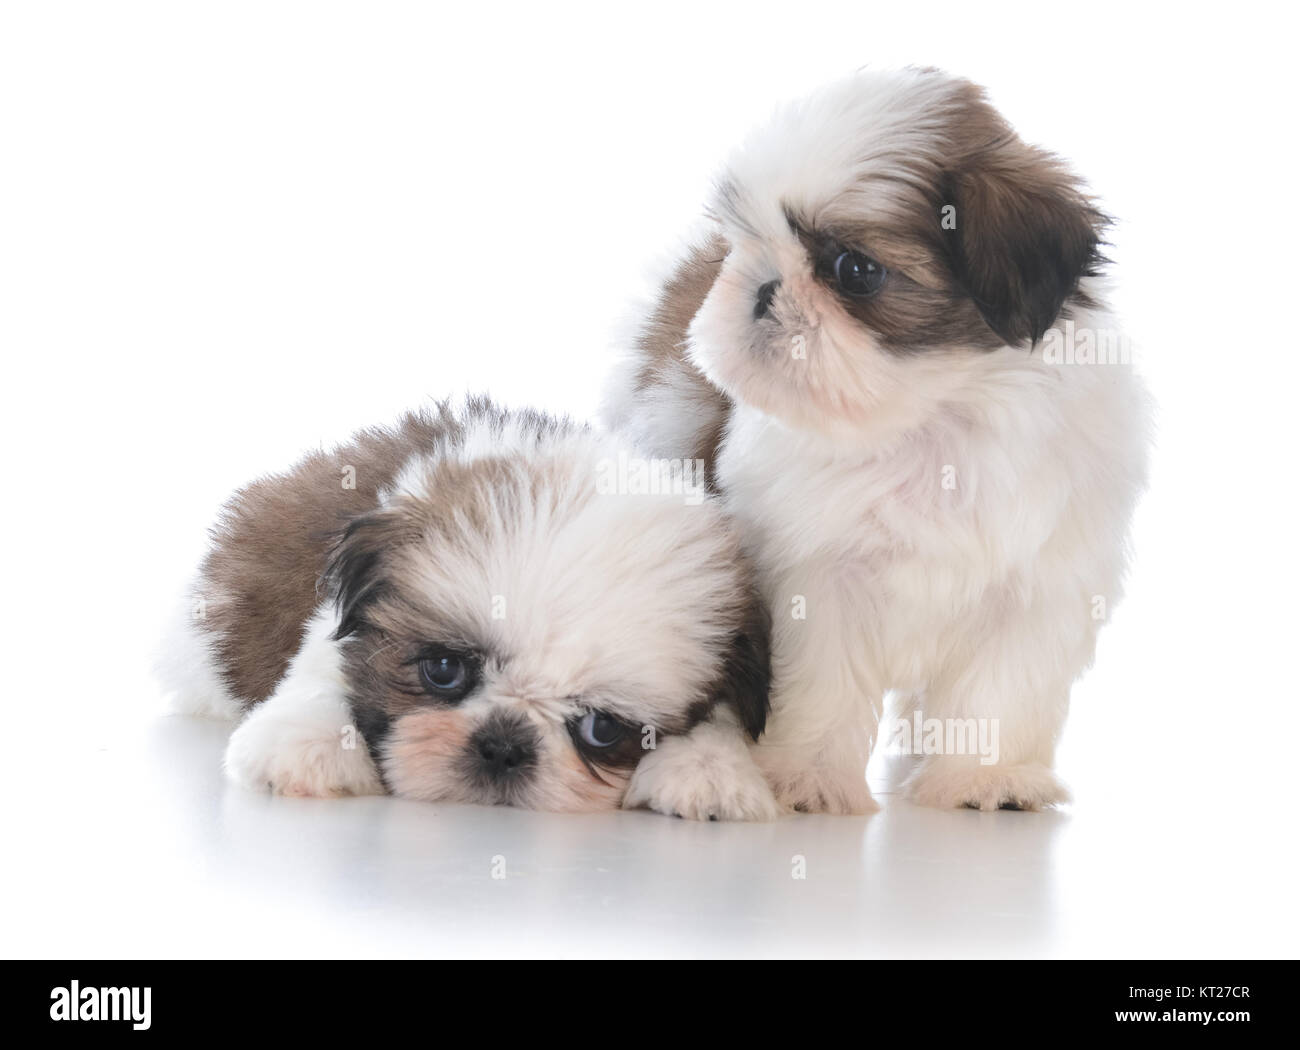 two adorable shih tzu puppy litter mates on white background Stock Photo -  Alamy